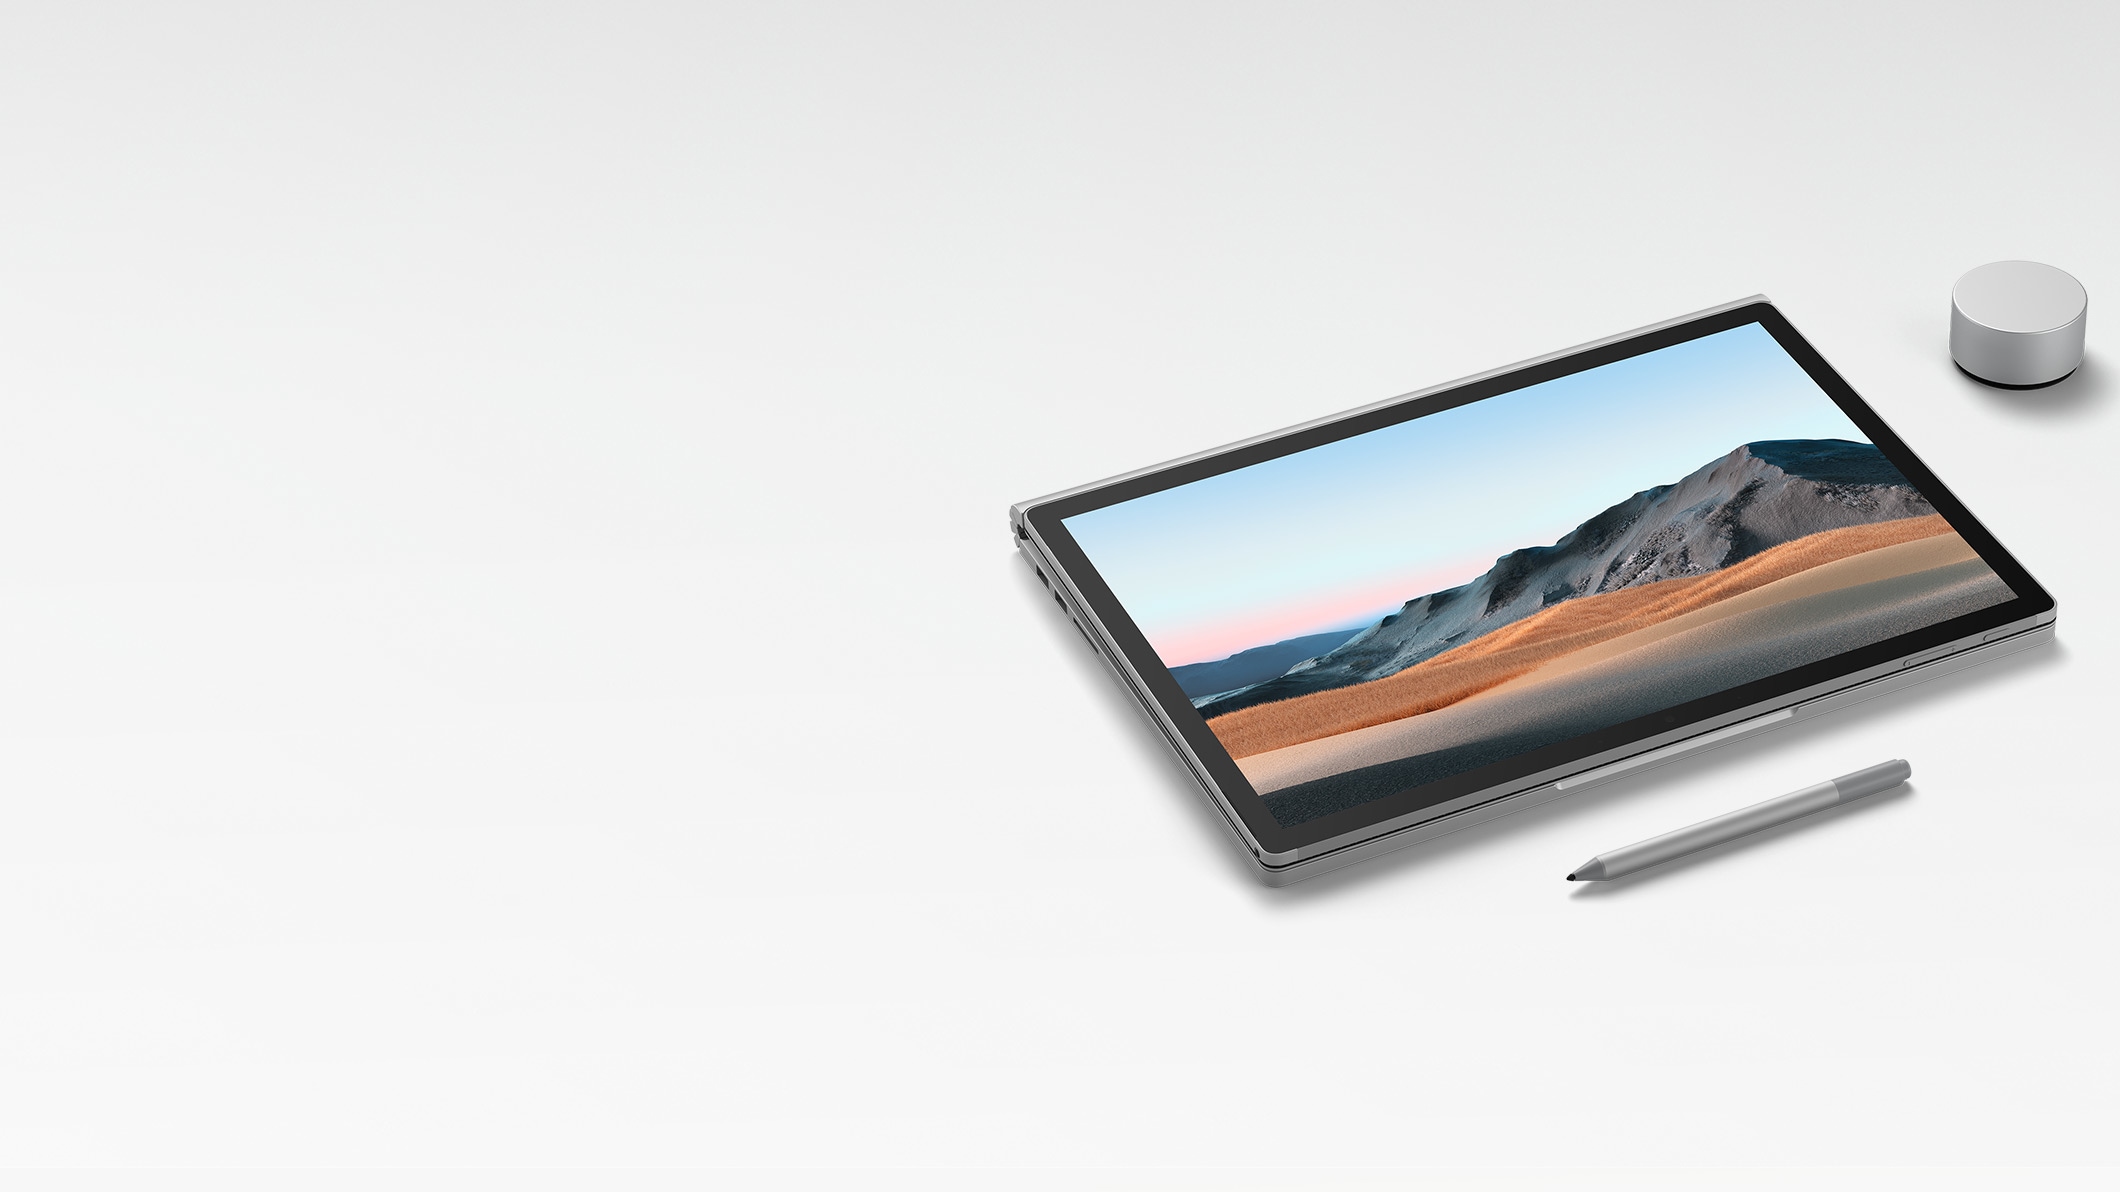 Surface Book 3 in Studio Mode with Surface Pen and Surface Dial